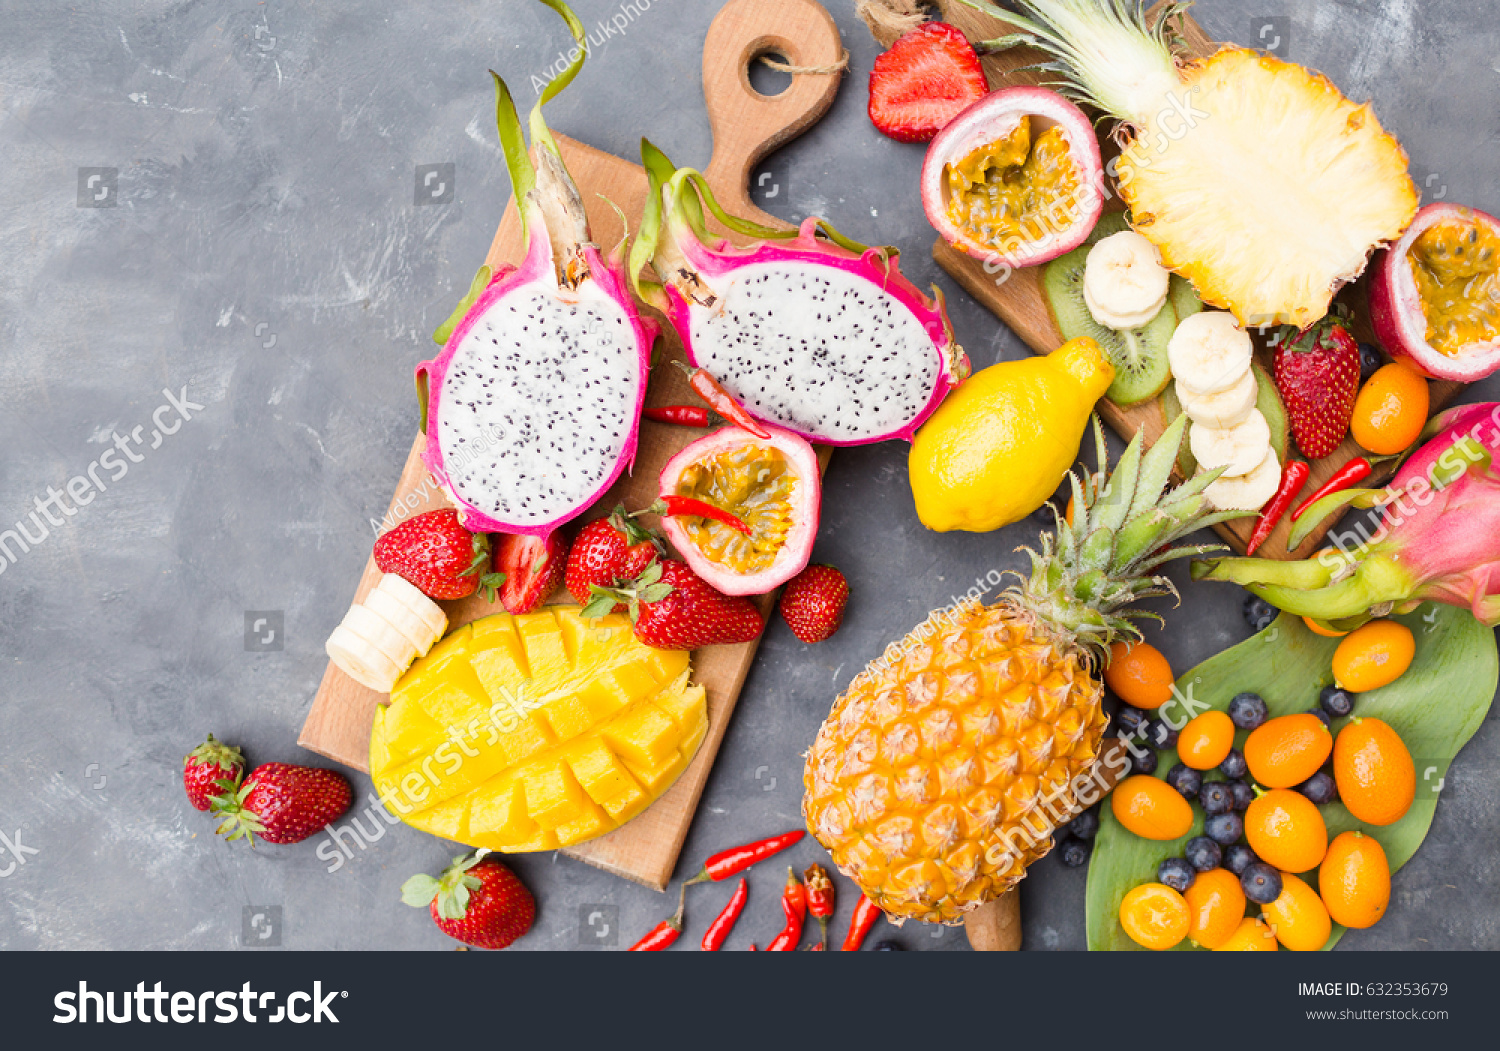 Exotic fruits on a gray background.  #632353679